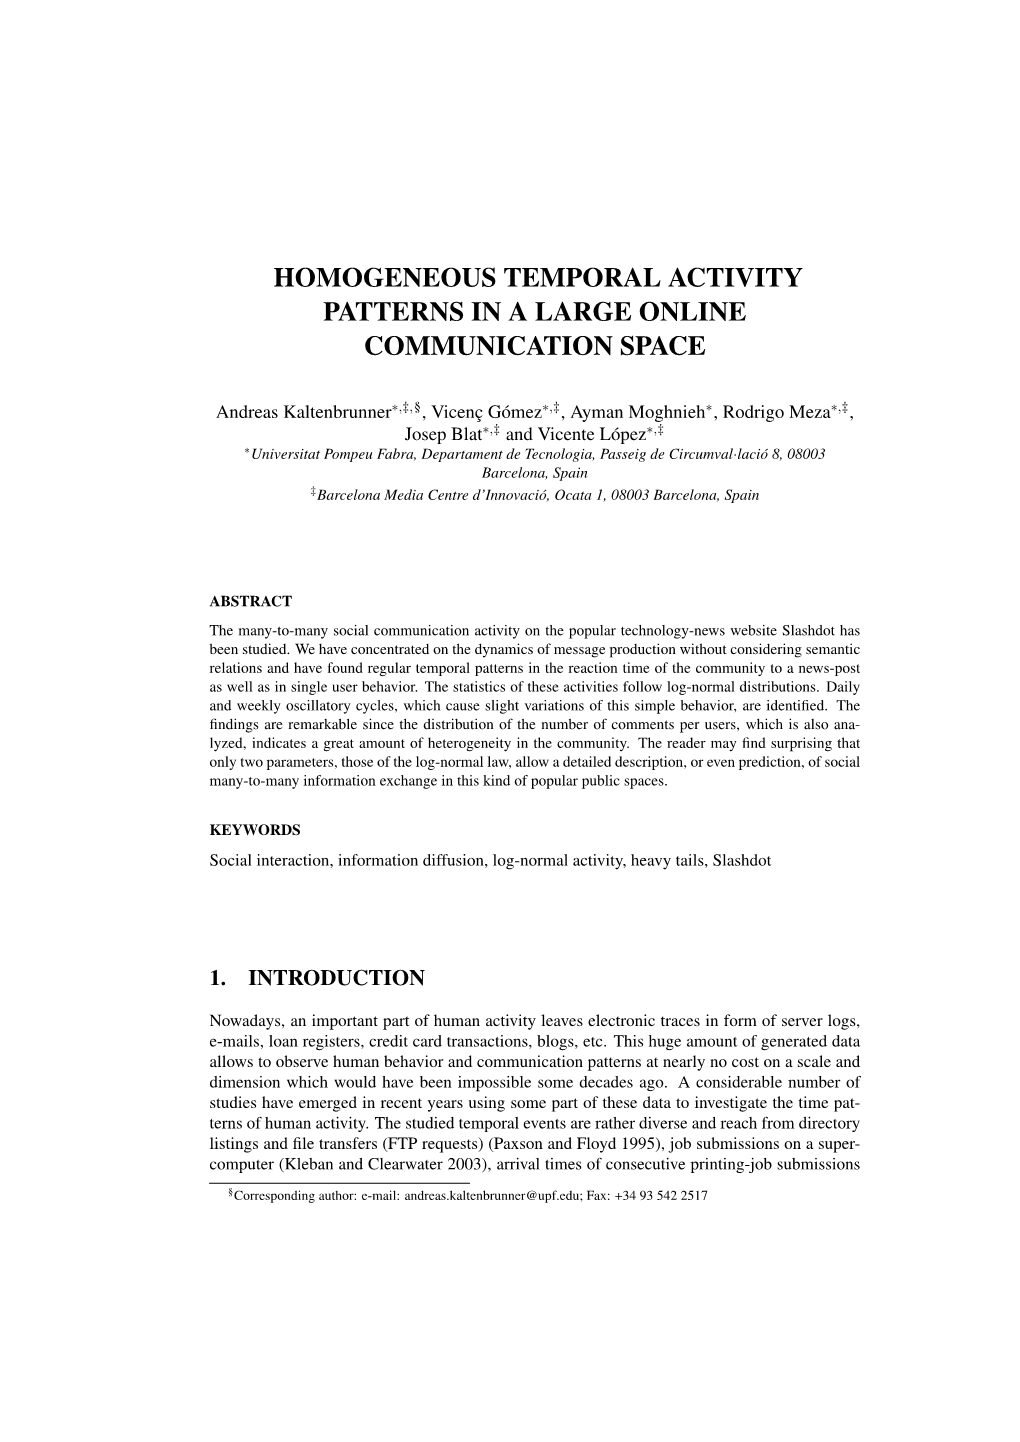 Homogeneous Temporal Activity Patterns in a Large Online Communication Space